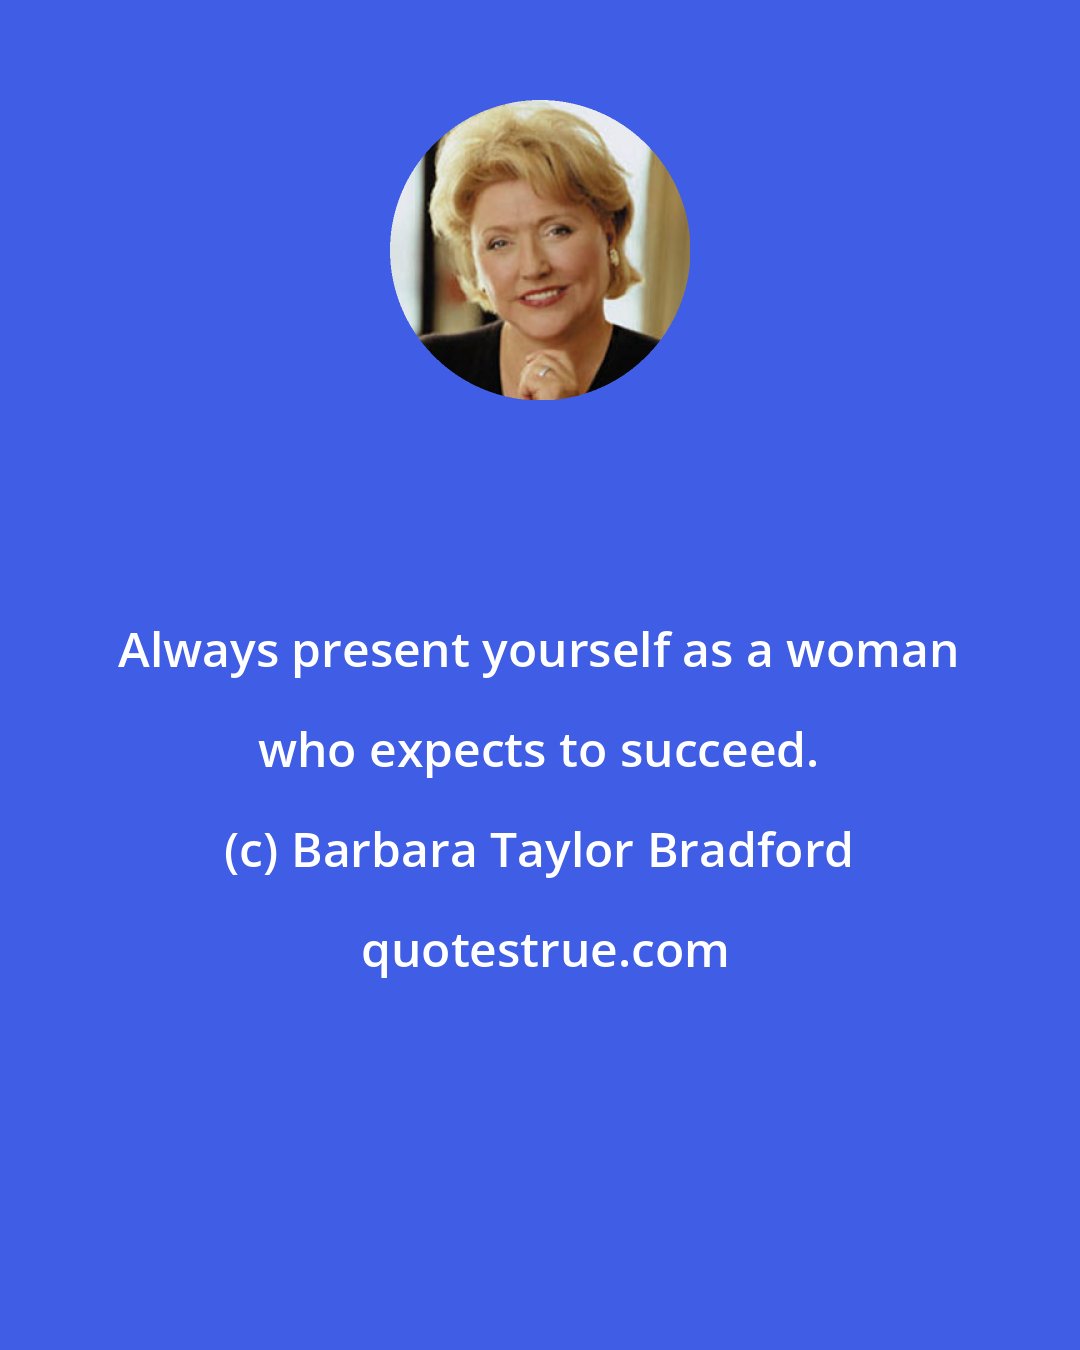 Barbara Taylor Bradford: Always present yourself as a woman who expects to succeed.